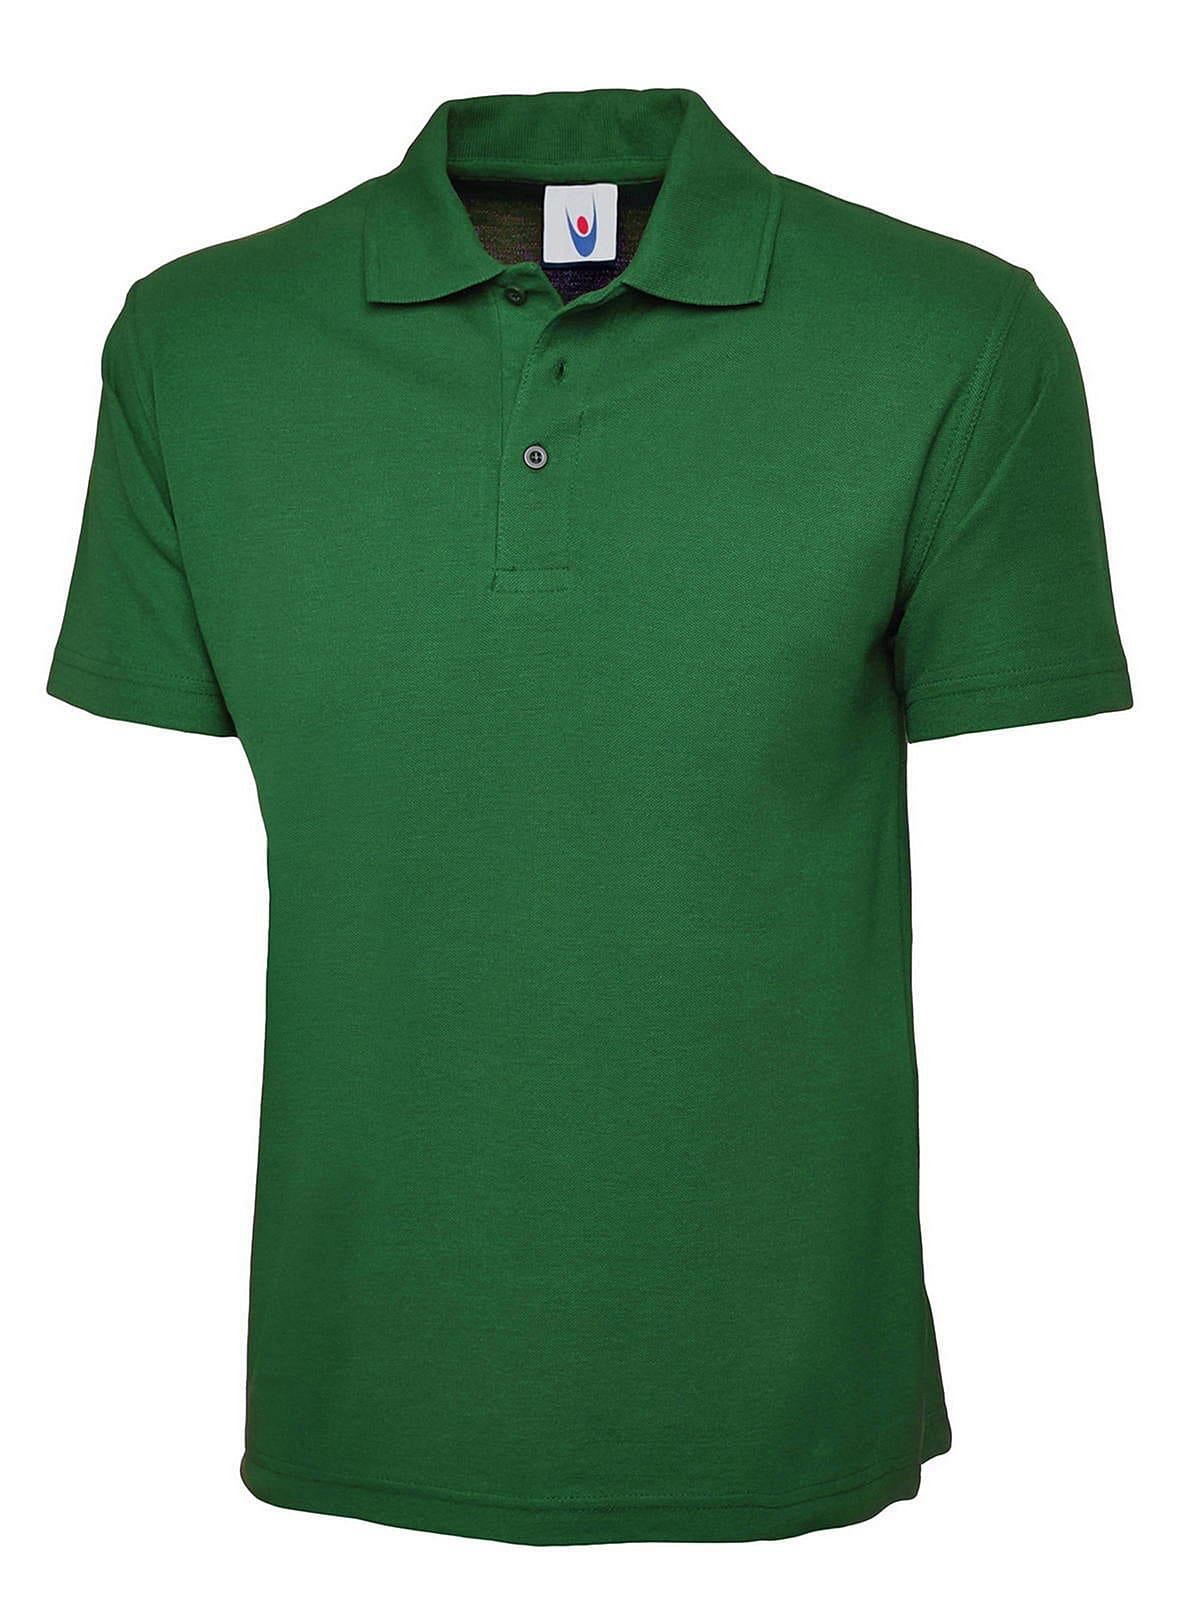 Uneek 220GSM Classic Polo Shirt in Kelly Green (Product Code: UC101)